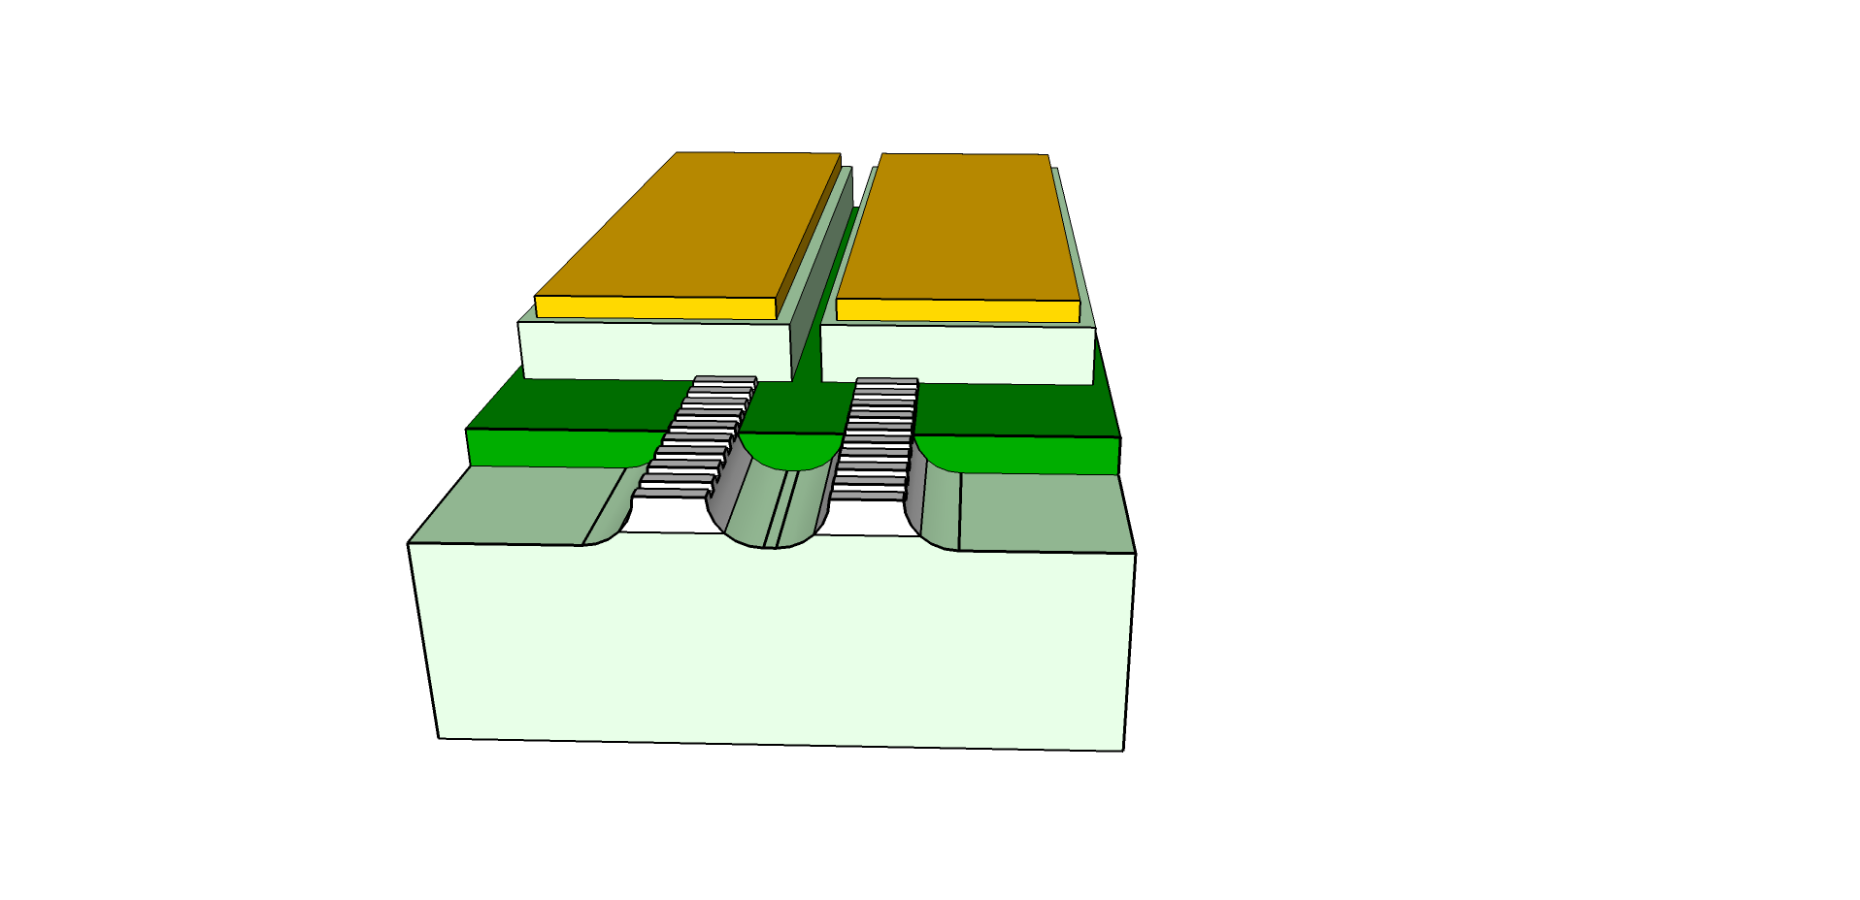 Enlarged view: Illustration of two naeigbouring DFB lasers